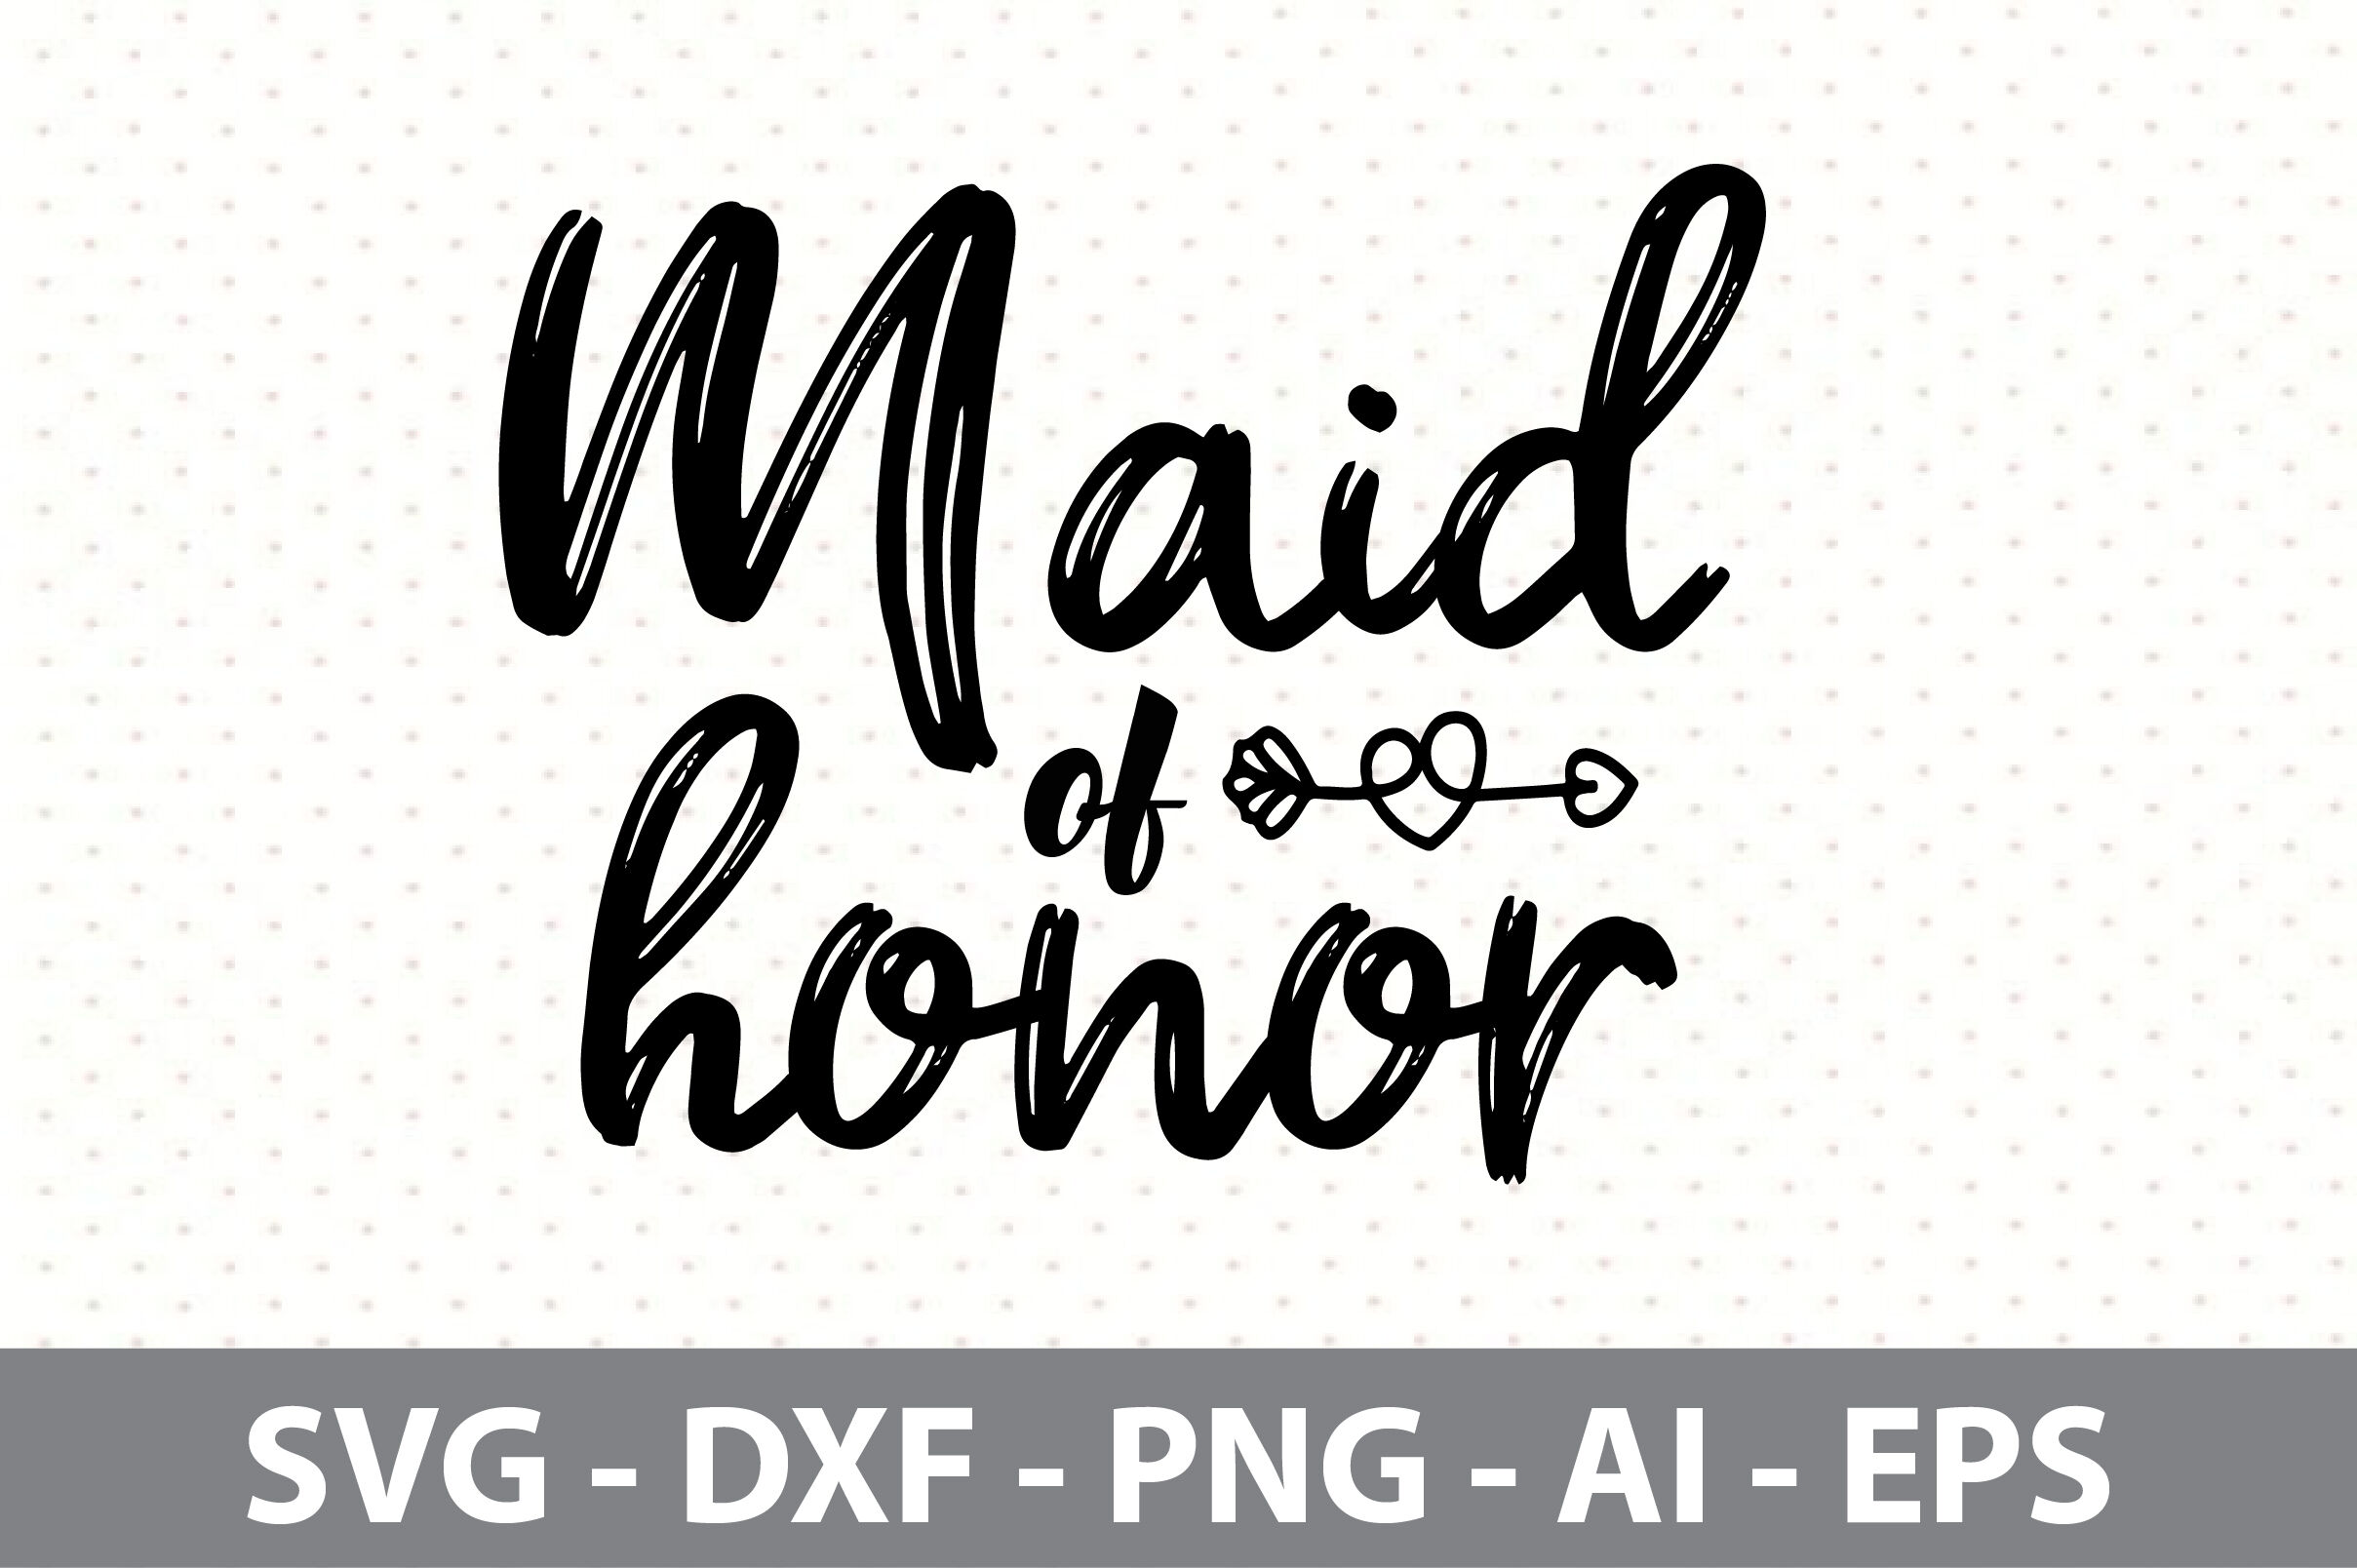 maid of honor font